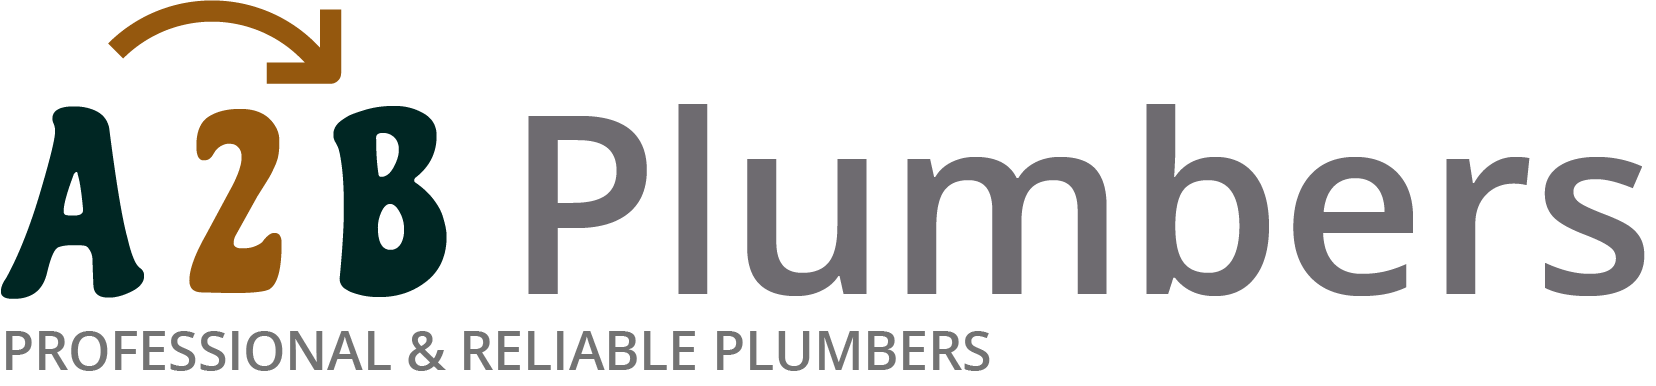 If you need a boiler installed, a radiator repaired or a leaking tap fixed, call us now - we provide services for properties in Surbiton and the local area.